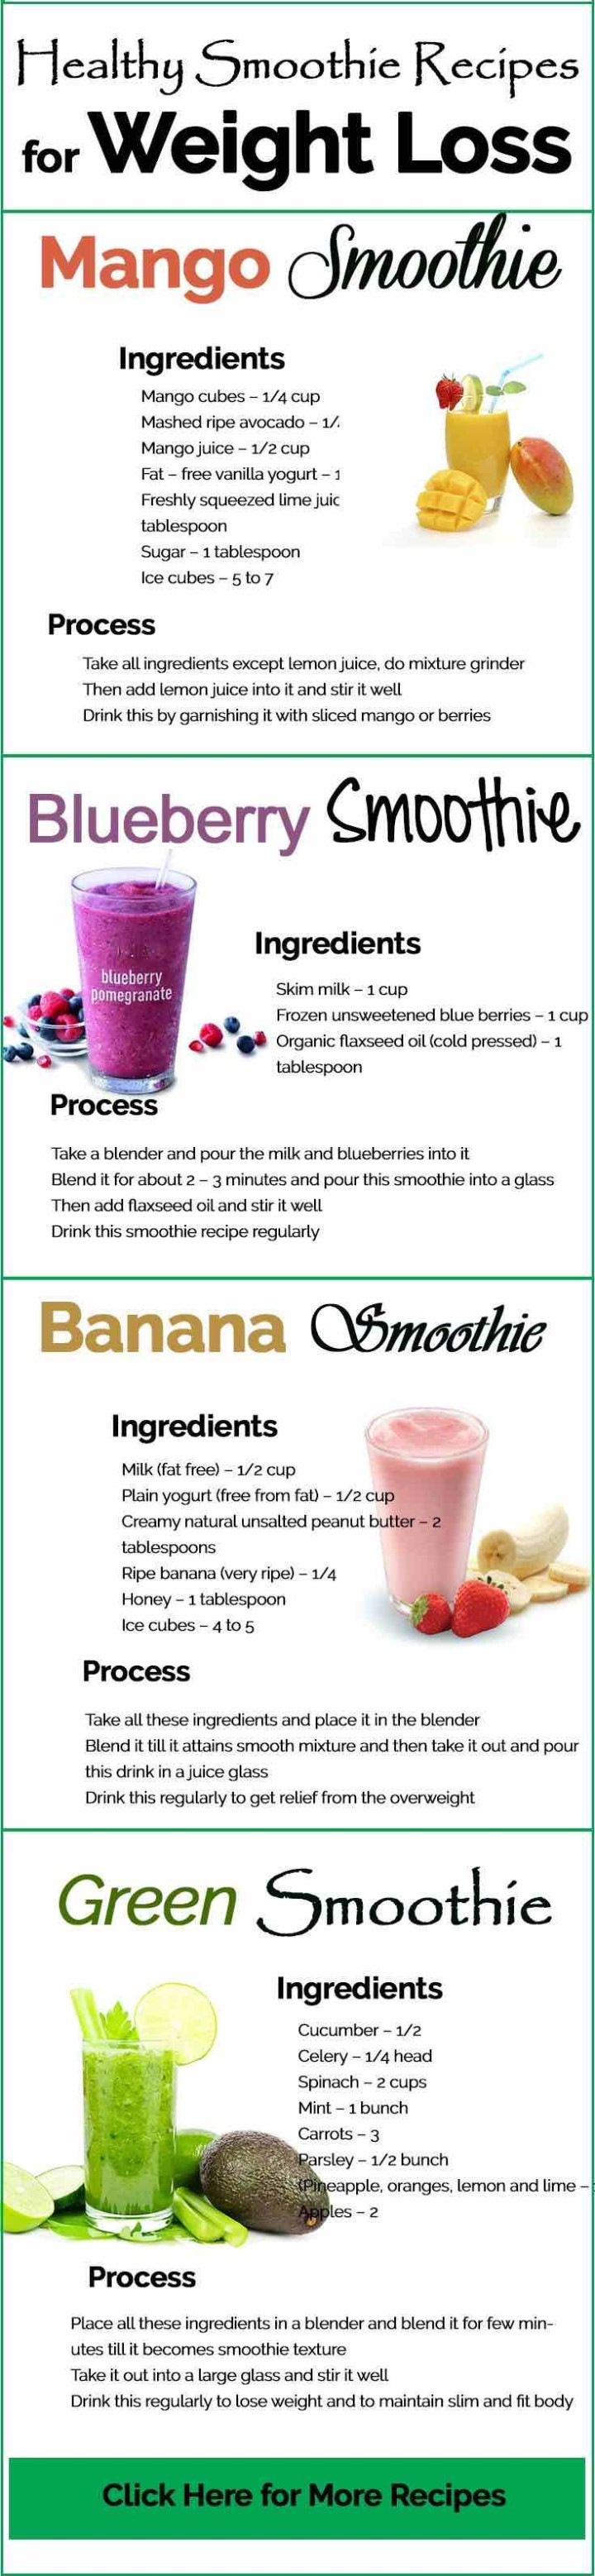 Healthy Homemade Smoothies For Weight Loss
 Juicing Recipes for Detoxing and Weight Loss MODwedding